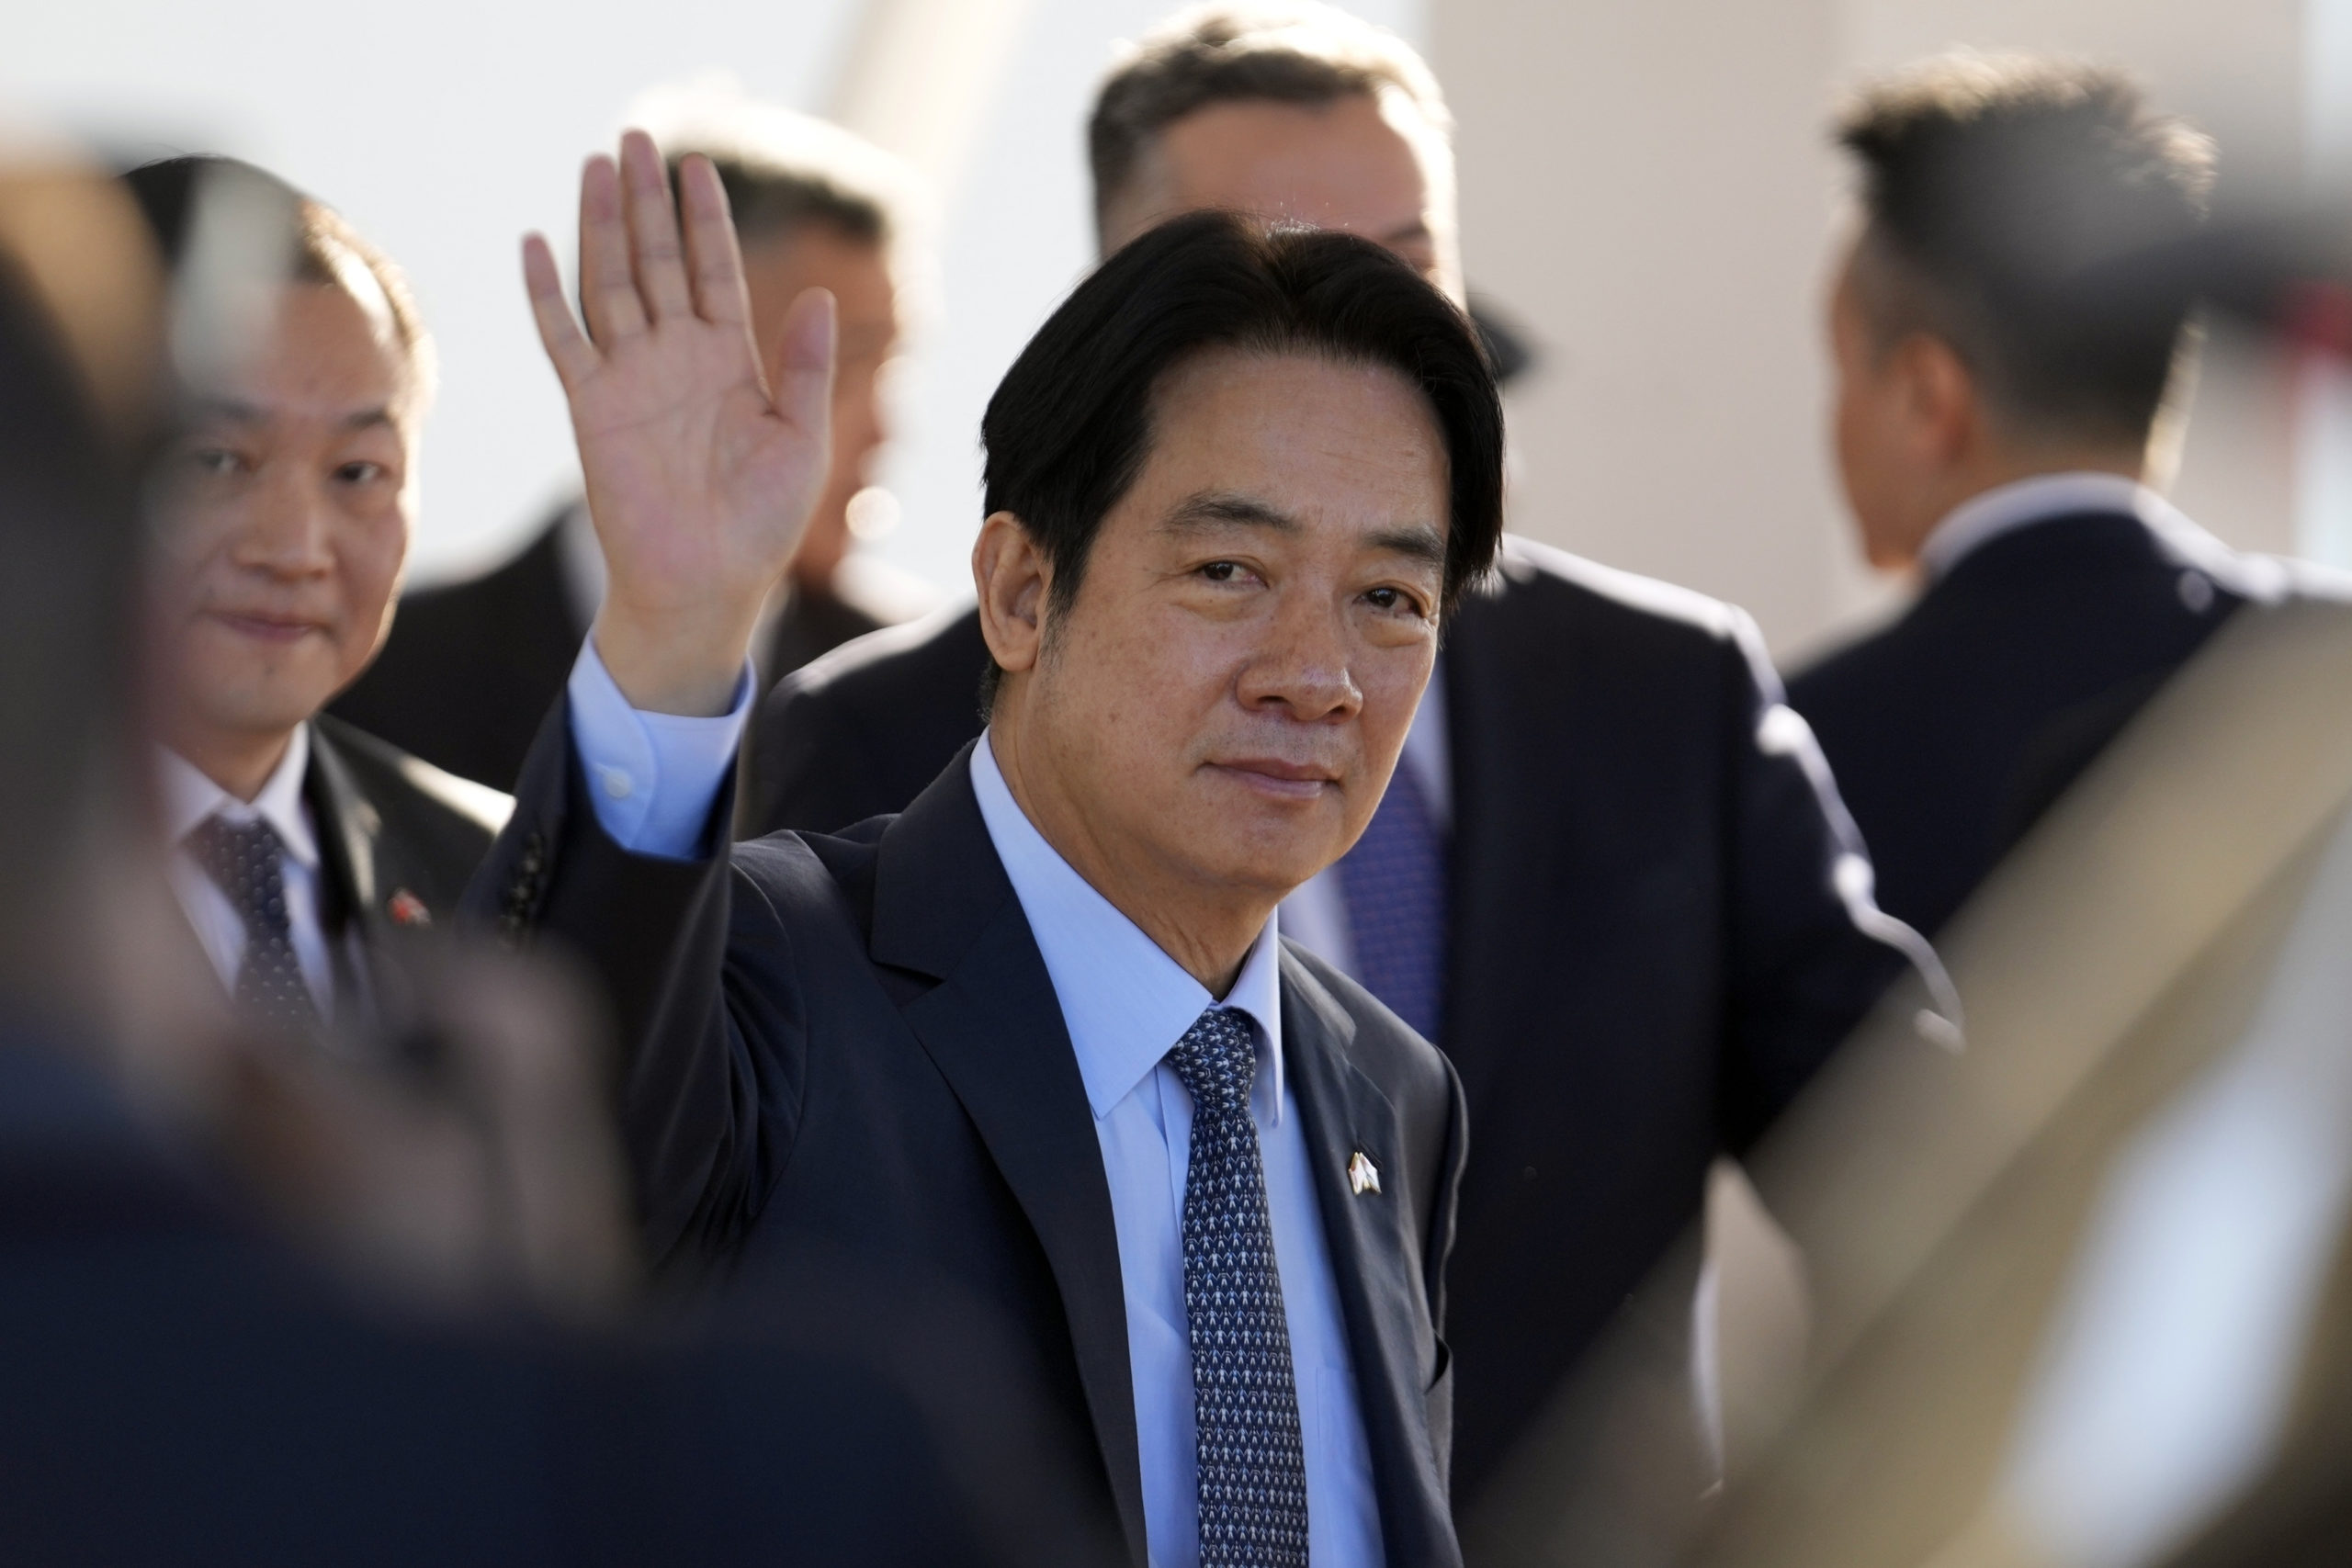 Taiwan's Vice President William Lai Ching-te waves after landing at Silvio Pettirossi airport in Luque, Paraguay, on Aug. 14. The Chinese military launched drills around Taiwan on Saturday as a "stern warning” over what it called collusion between “separatists and foreign forces” days after Lai stopped over in the United States.